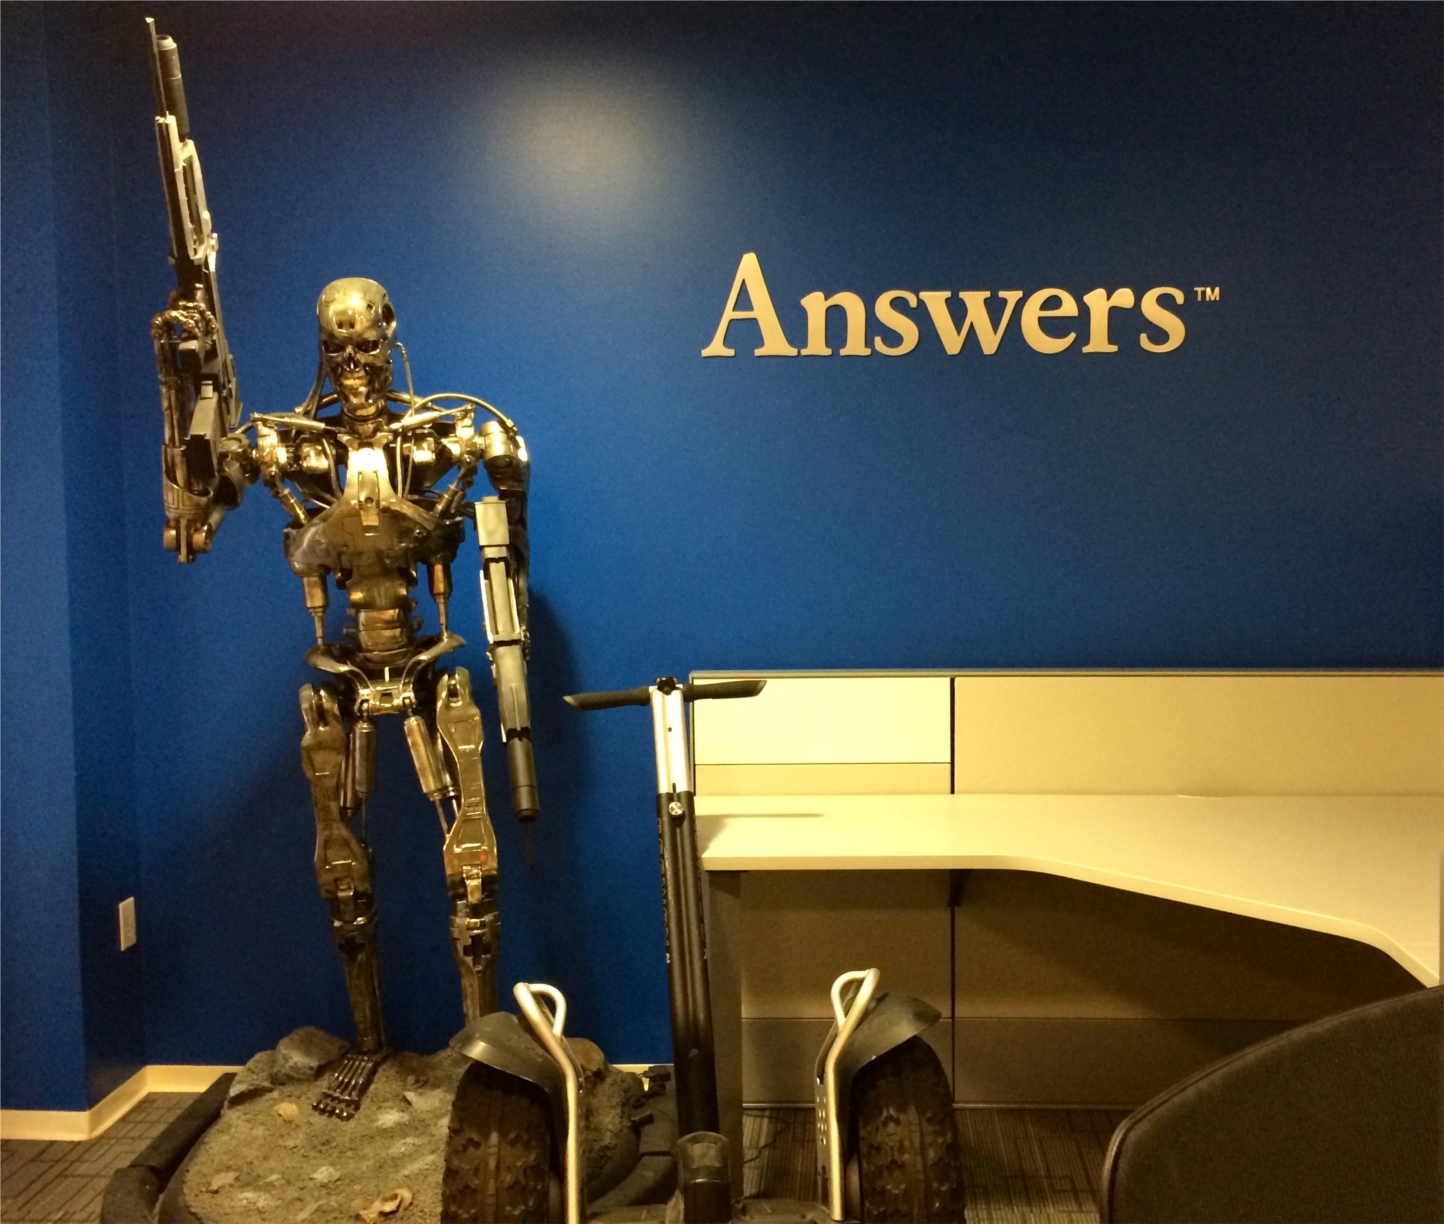 Welcome to Answers' killer headquarters in the Silicon Archway.